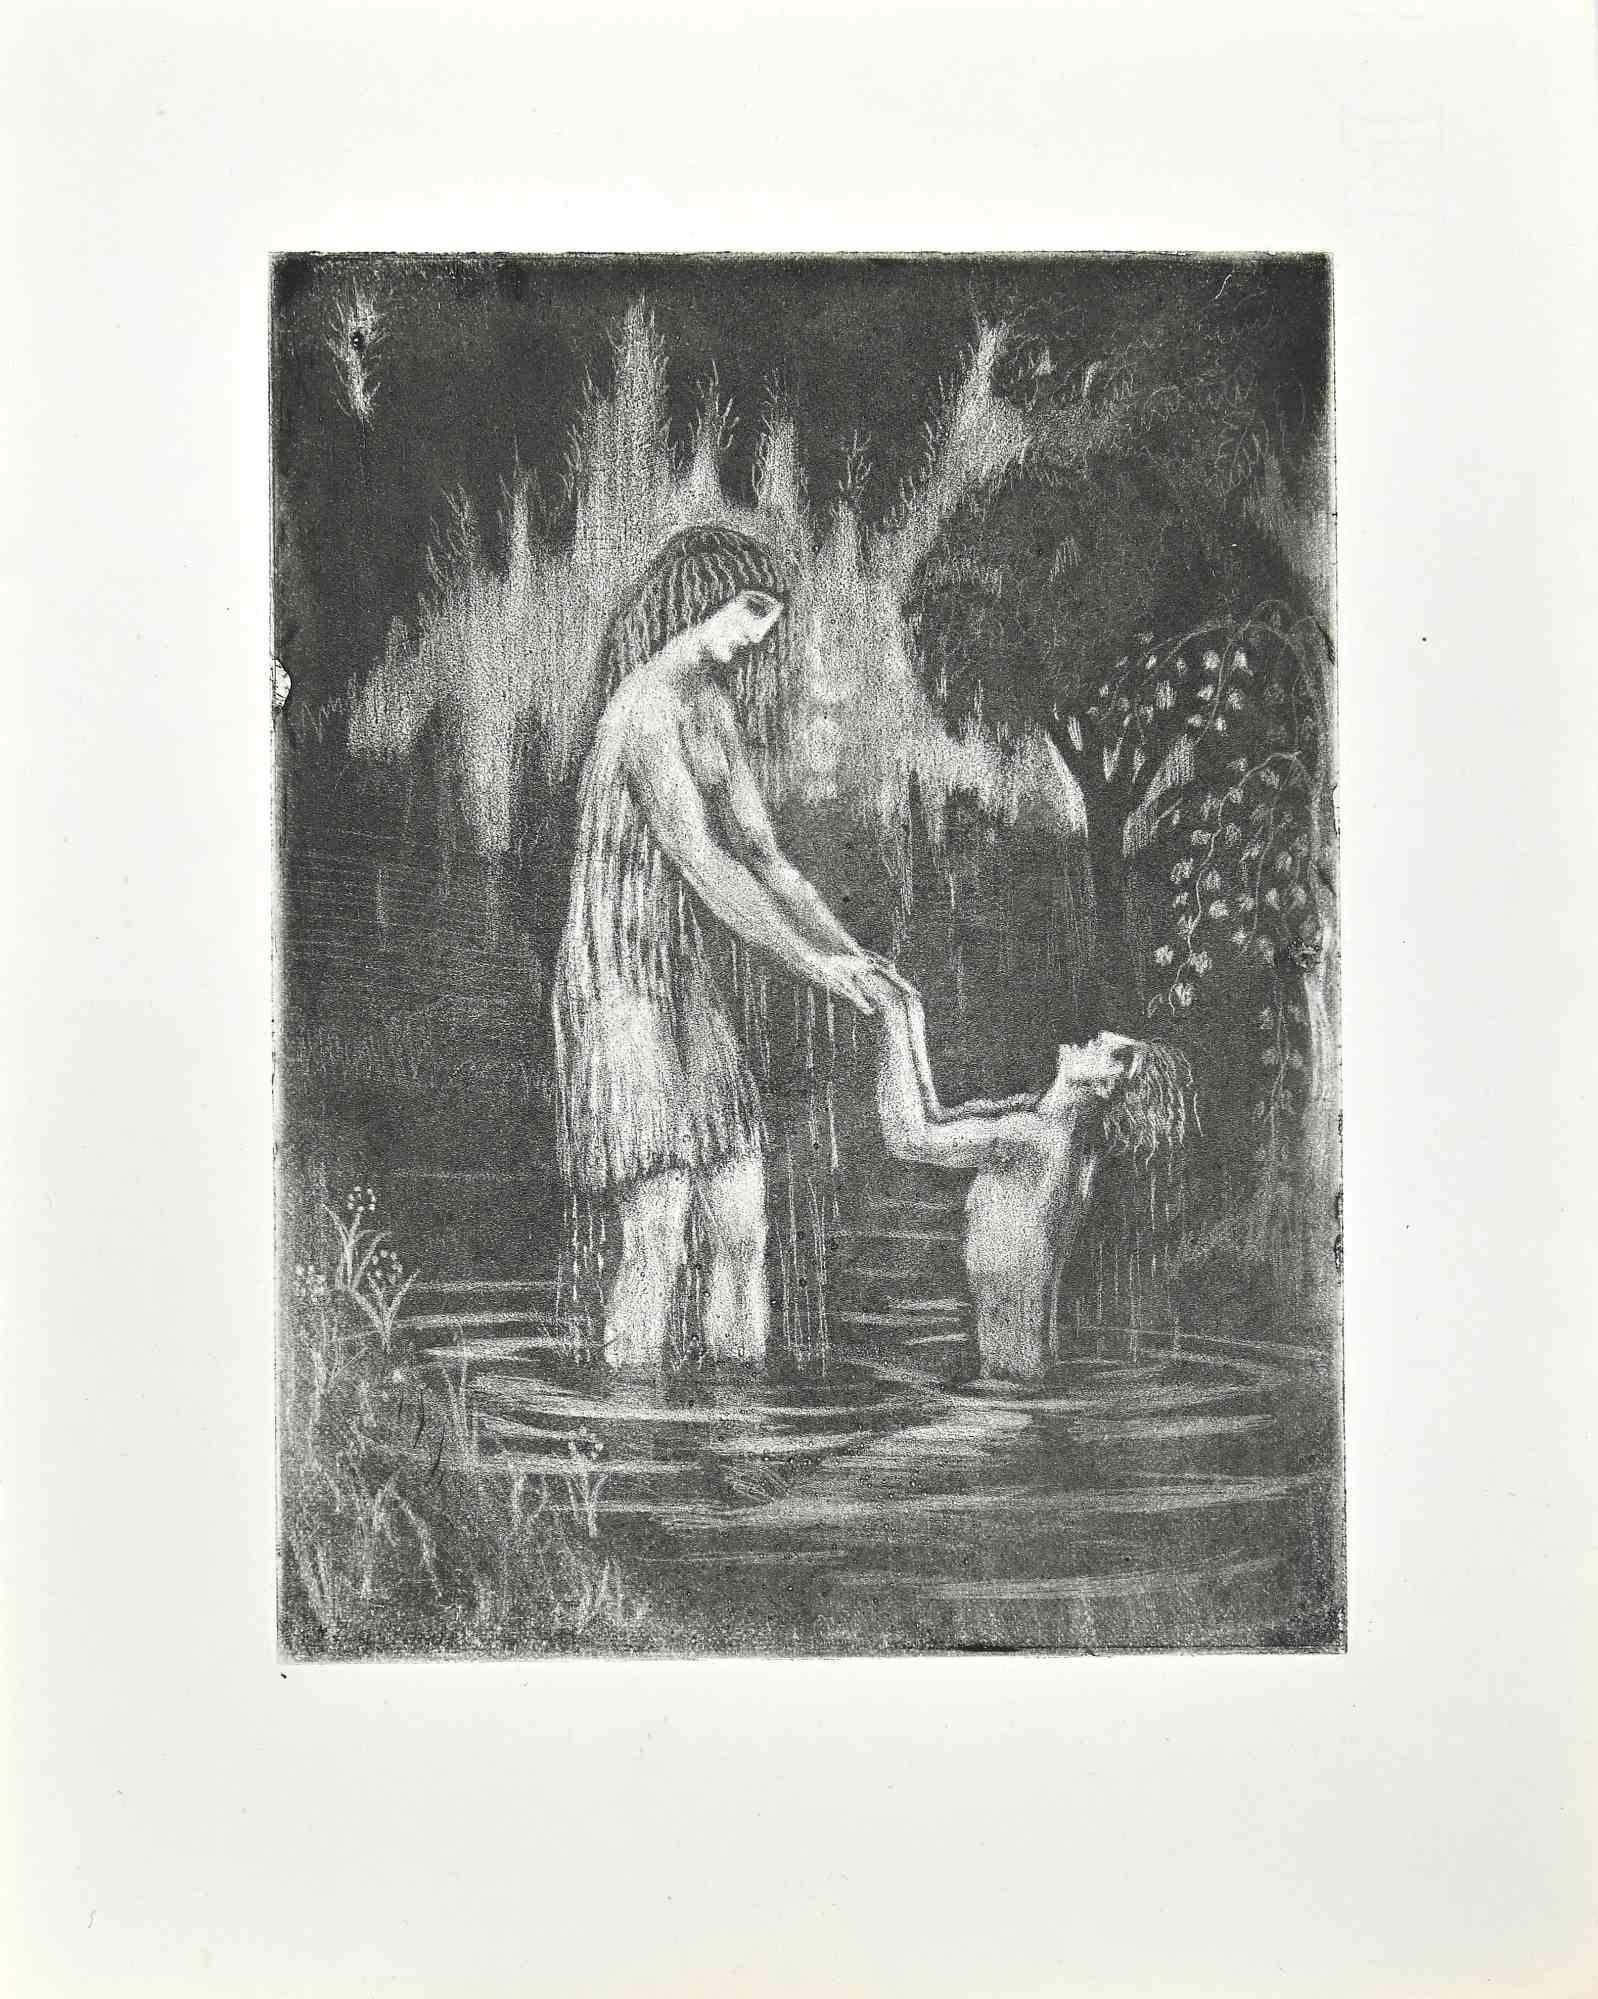 The Shandy Bath - Etching by Raphael Drouart - Early 20th century